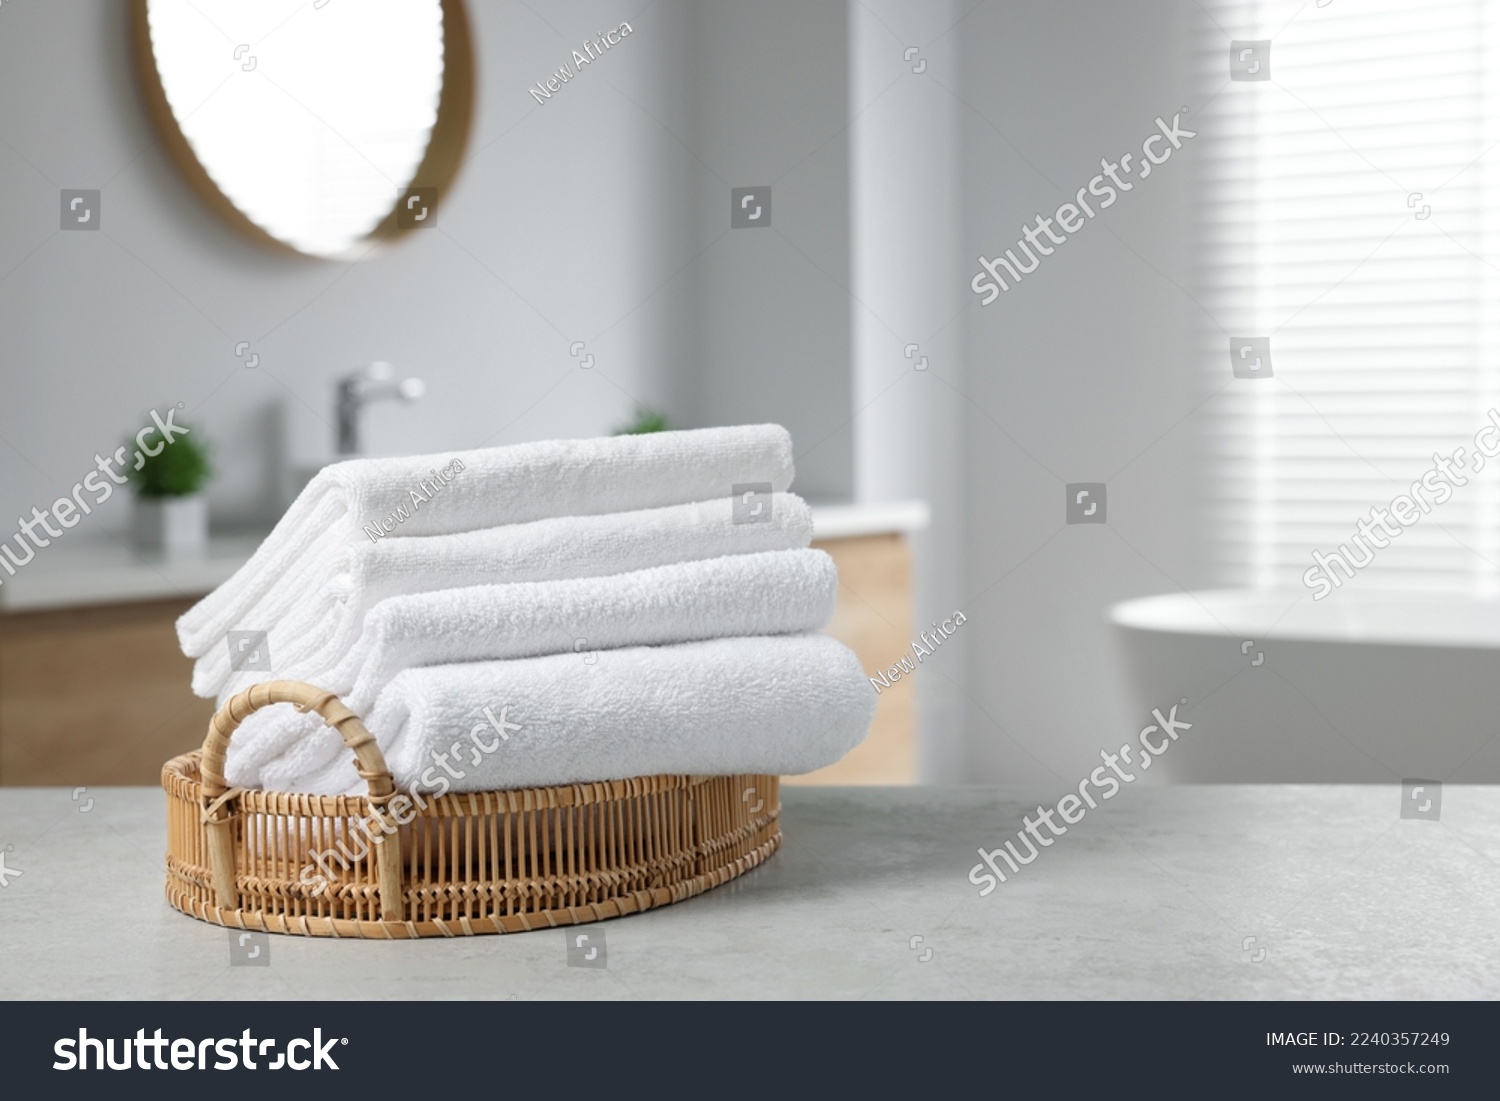 Wicker basket with white towels on table in bathroom. Space for text #2240357249